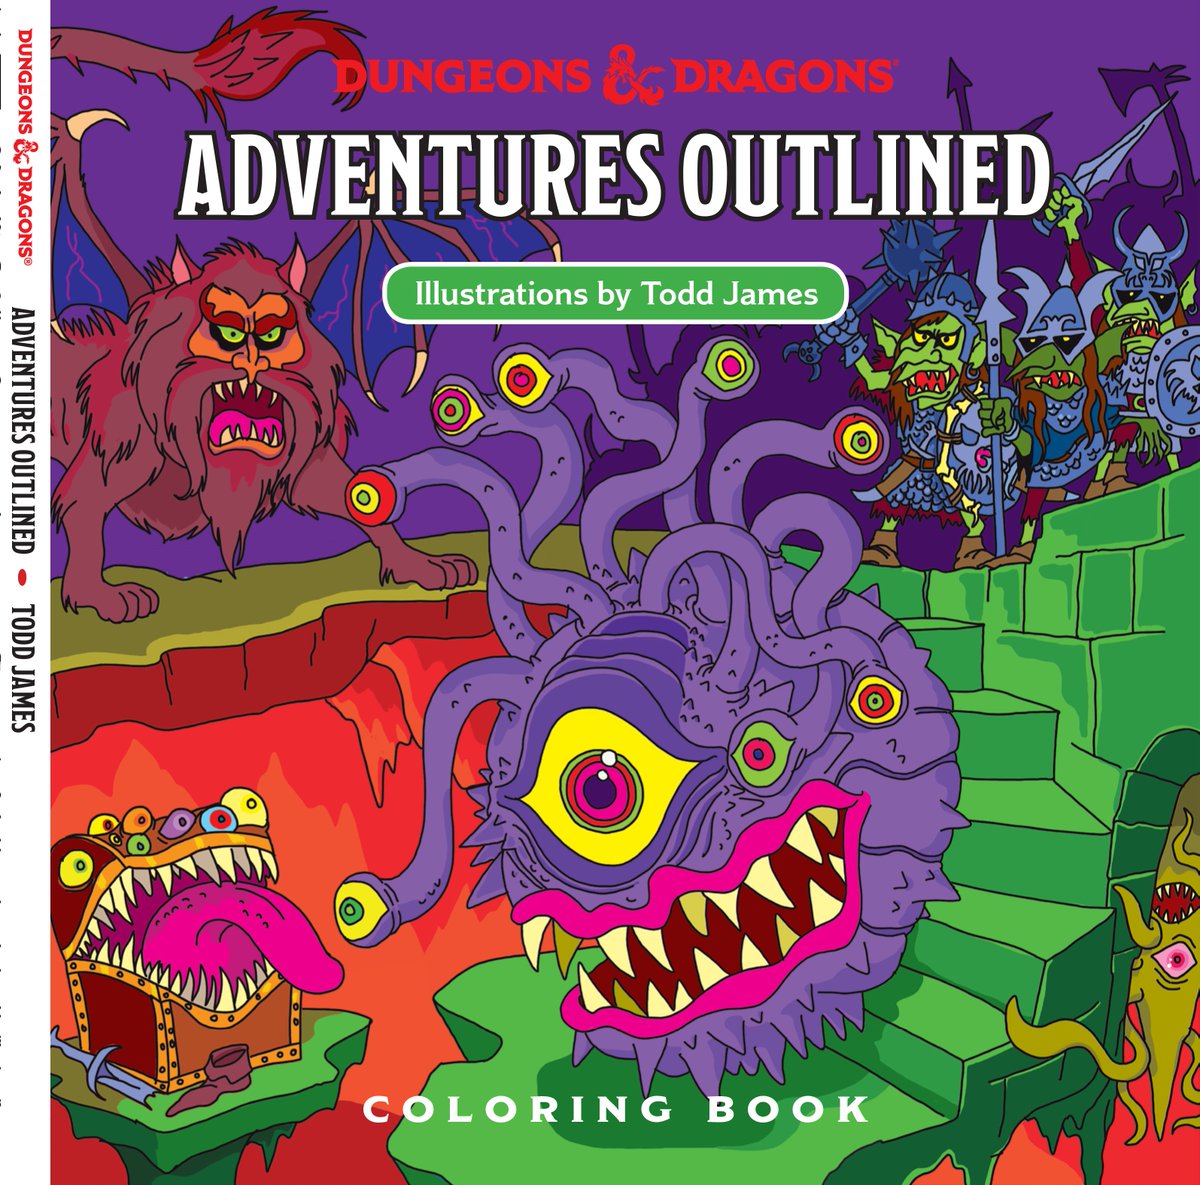 Todd James @ToddJamesREAS                      14s14 seconds ago
#Postingthisagain :) @Wizards_DnD X @ToddJamesREAS #Joinforces like a band of #Goblins eating broken crayons. #dropping A #coloring #book of #DND #MONSTERS #AdventuresOutlined